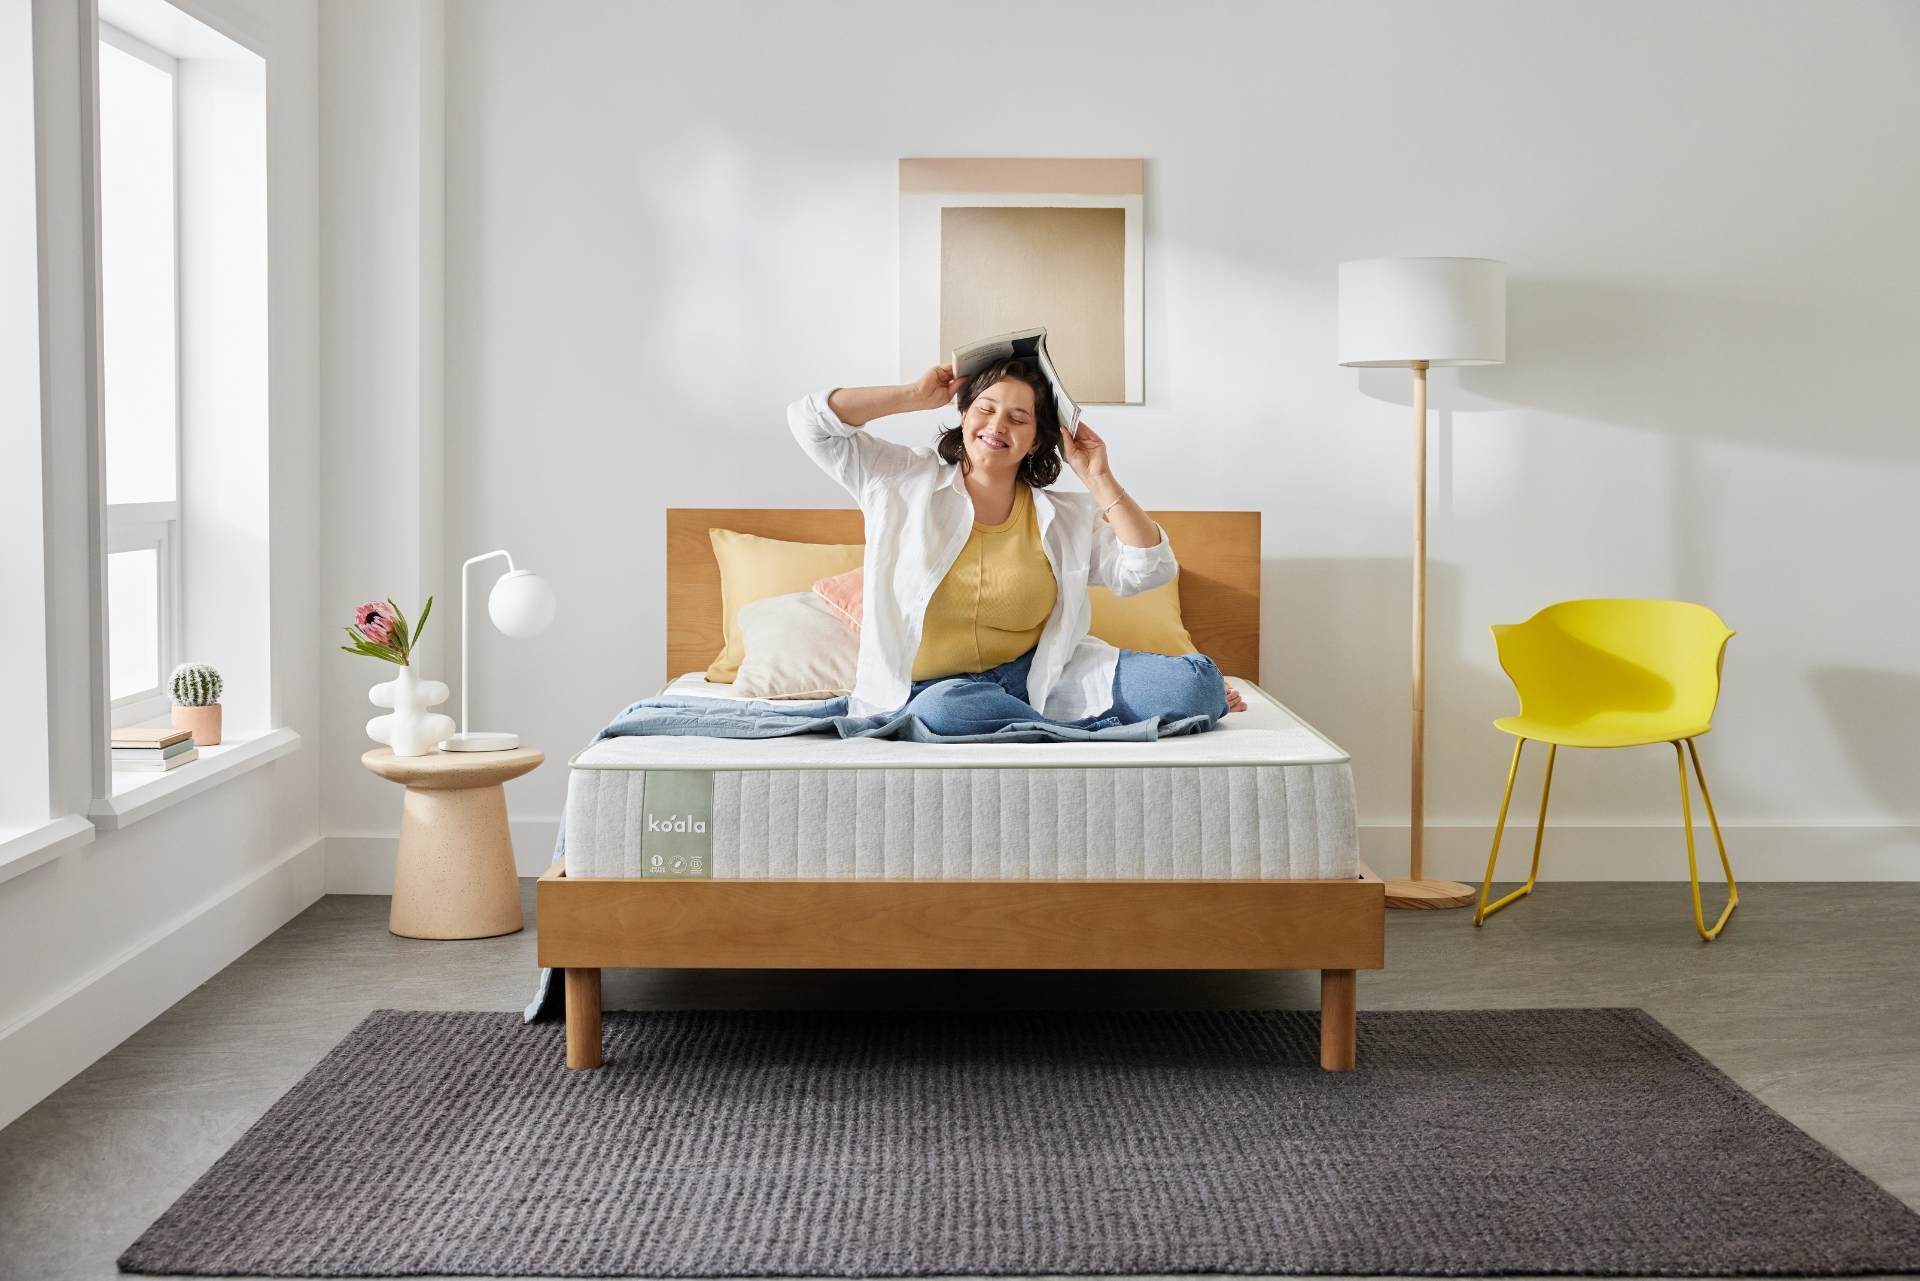 A woman sits happily on her Koala SE Mattress in a brightly lit room